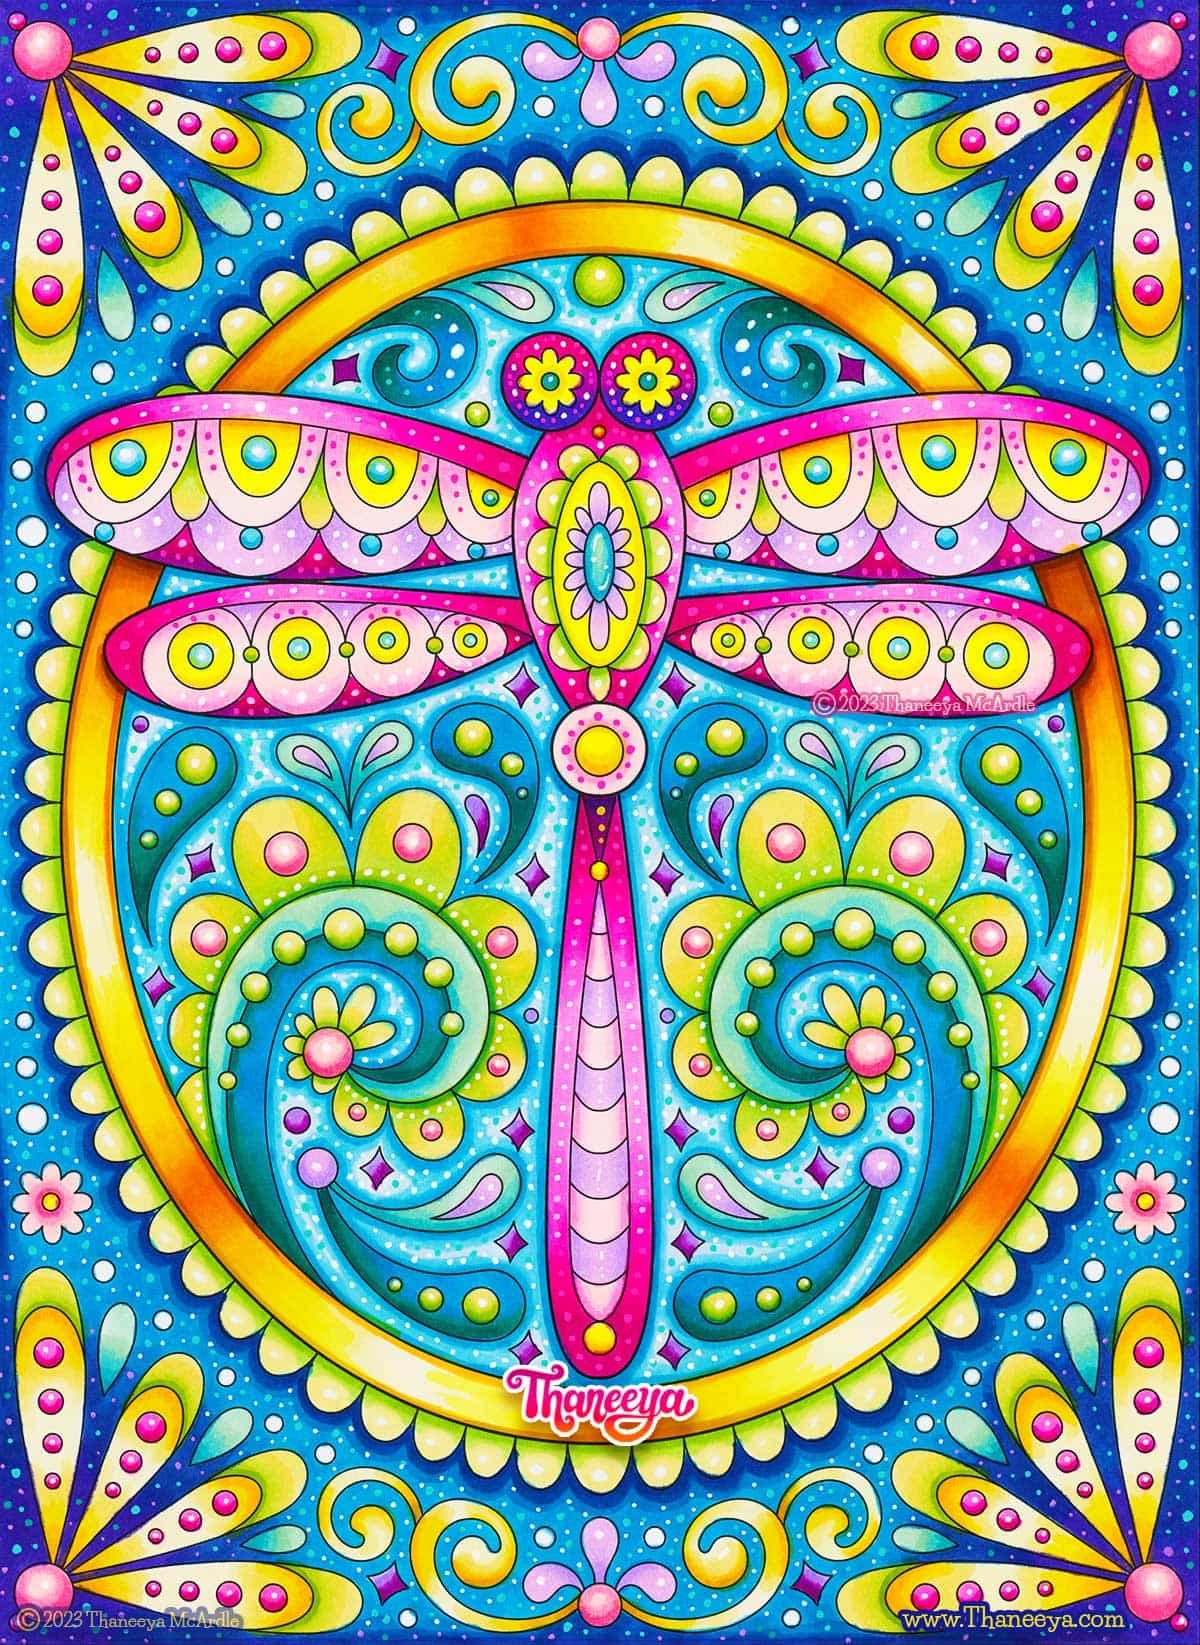 https://images.squarespace-cdn.com/content/v1/5511fc7ce4b0a3782aa9418b/1676858001852-ENT3ZP5F205ERBZU138J/Dragonfly-coloring-page-by-Thaneeya-McArdle-2.jpg